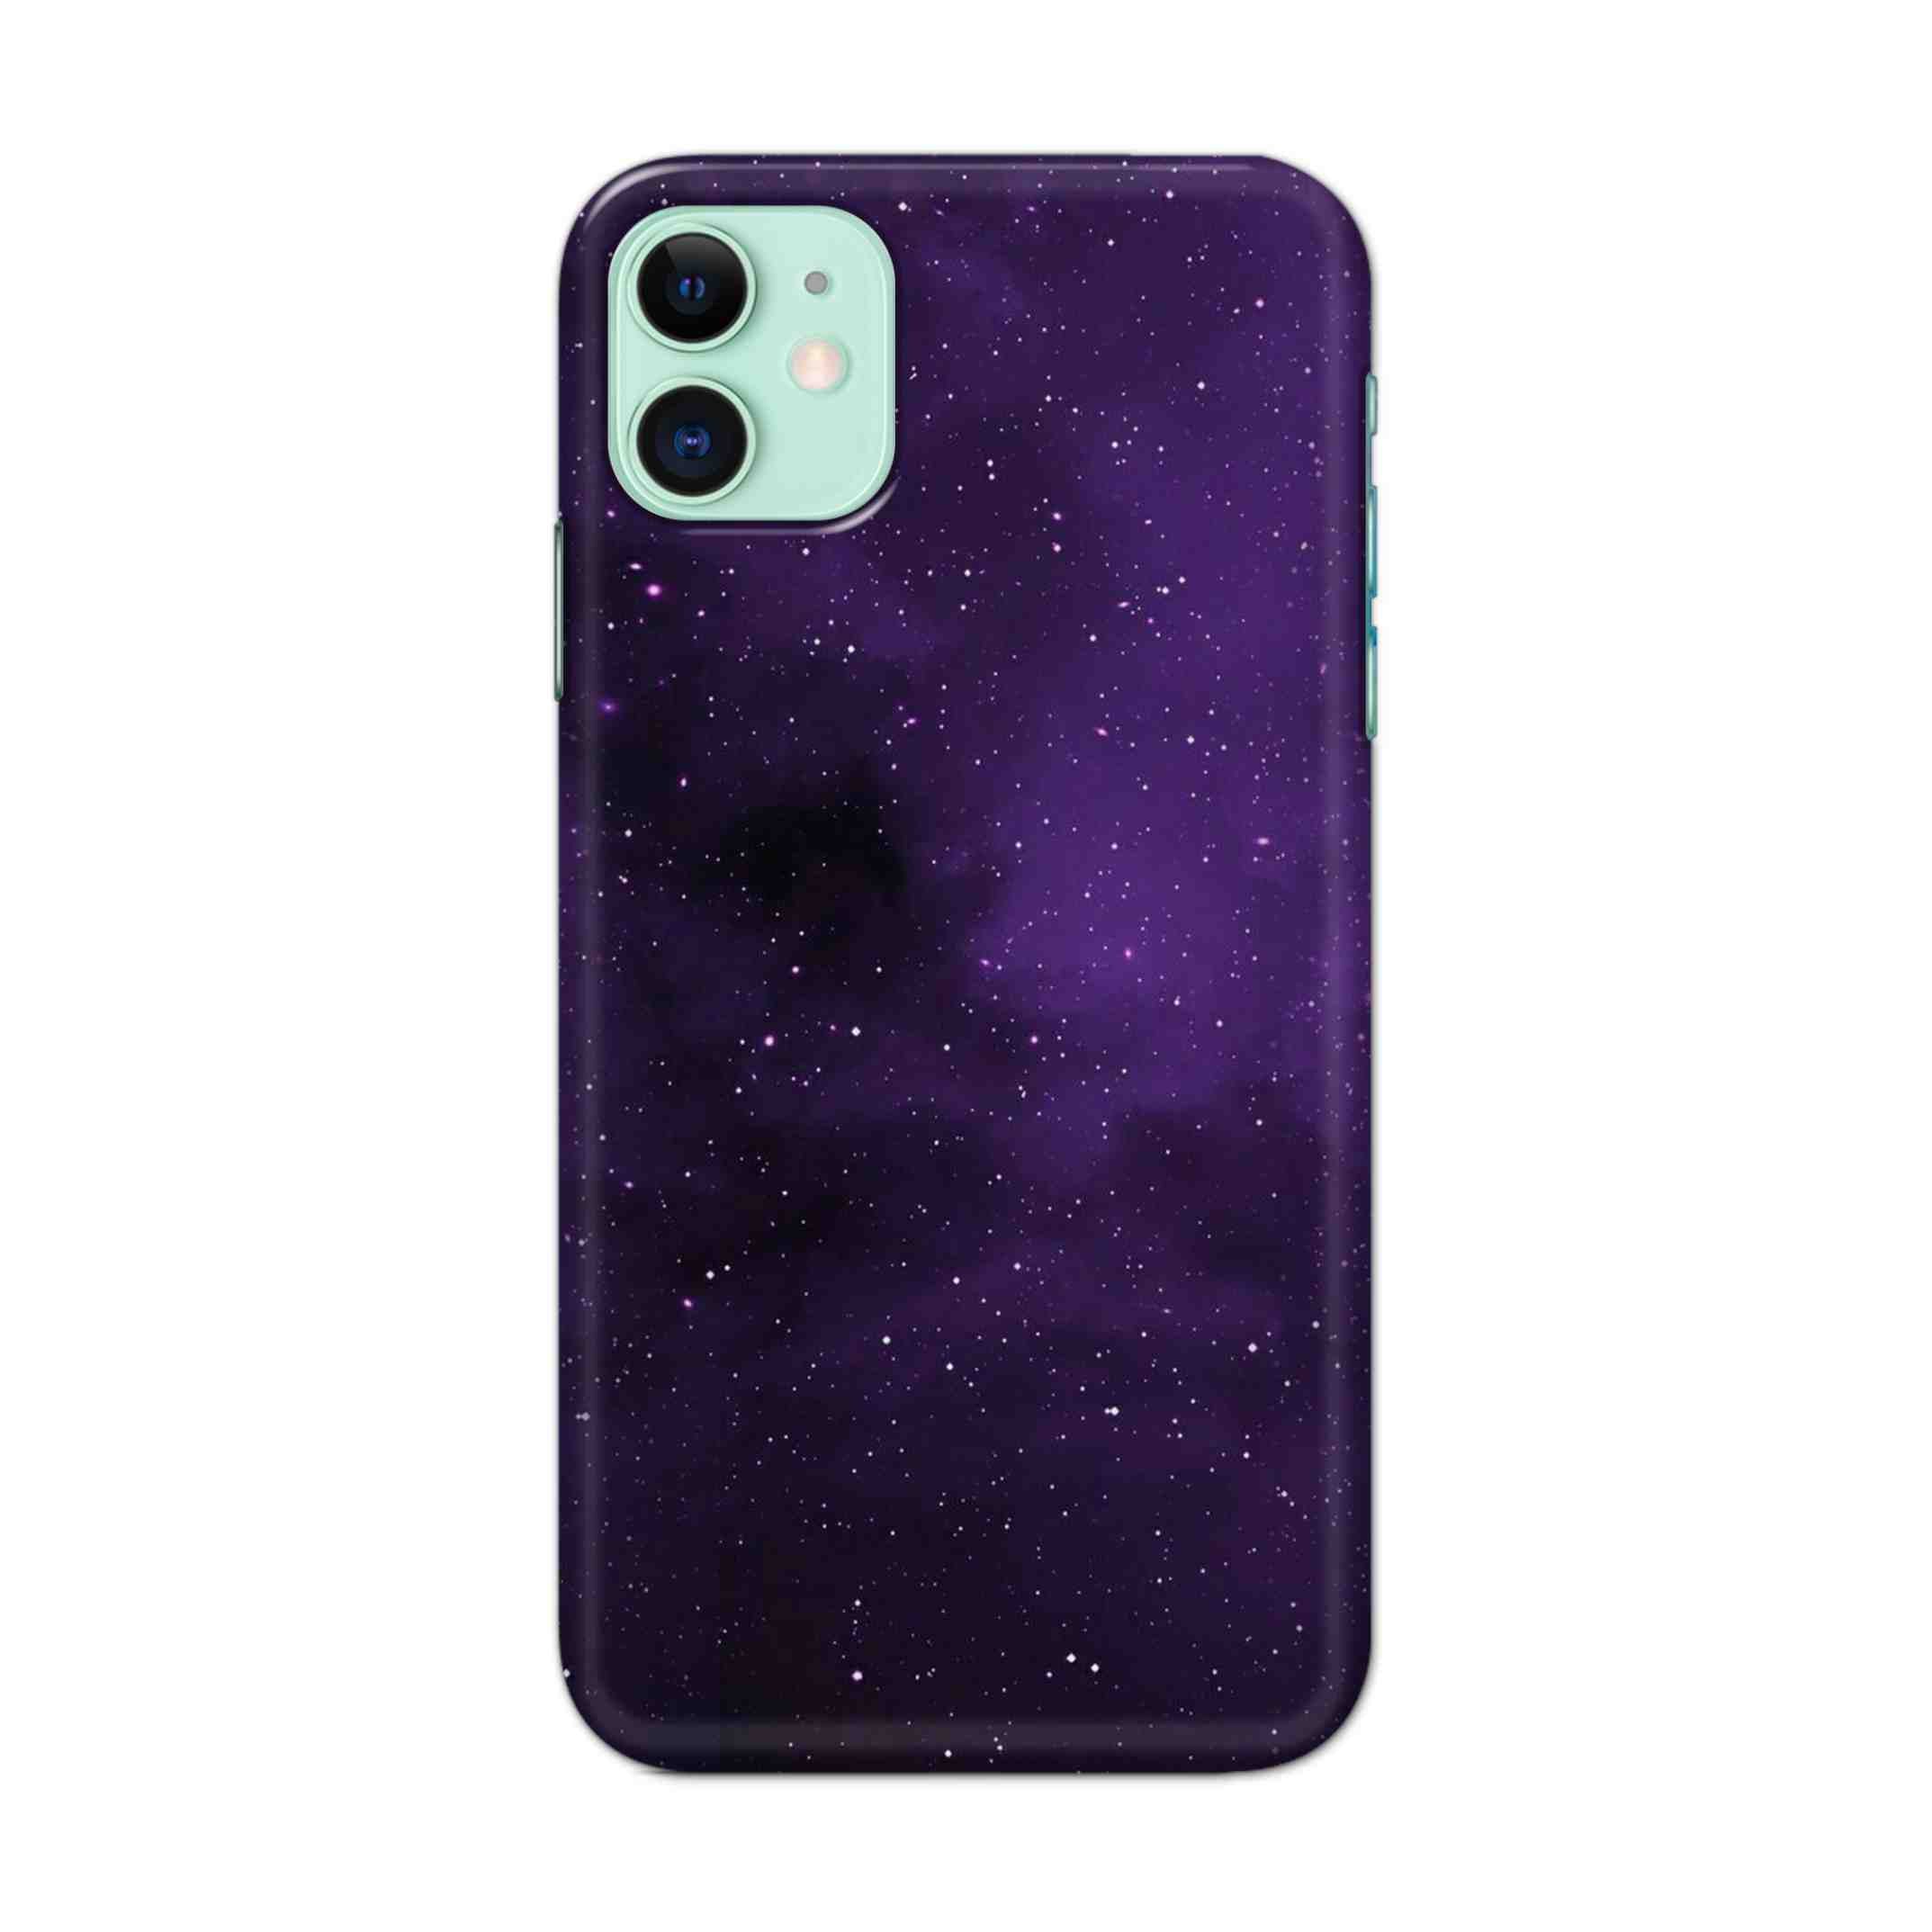 Buy Bluesky Hard Back Mobile Phone Case Cover For iPhone 11 Online